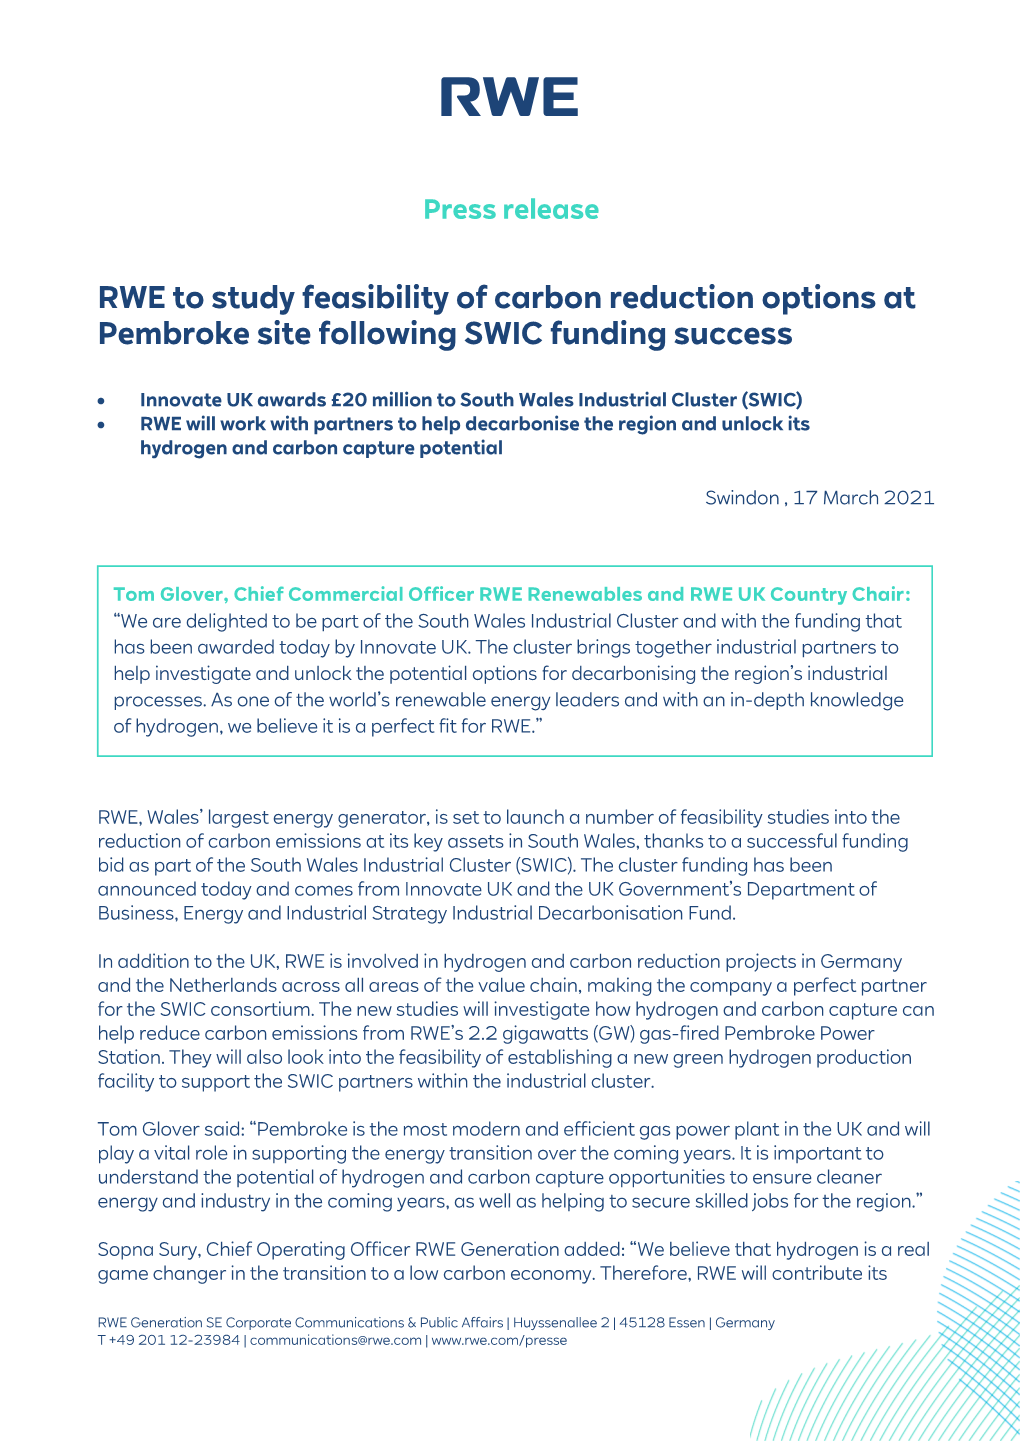 RWE to Study Feasibility of Carbon Reduction Options at Pembroke Site Following SWIC Funding Success